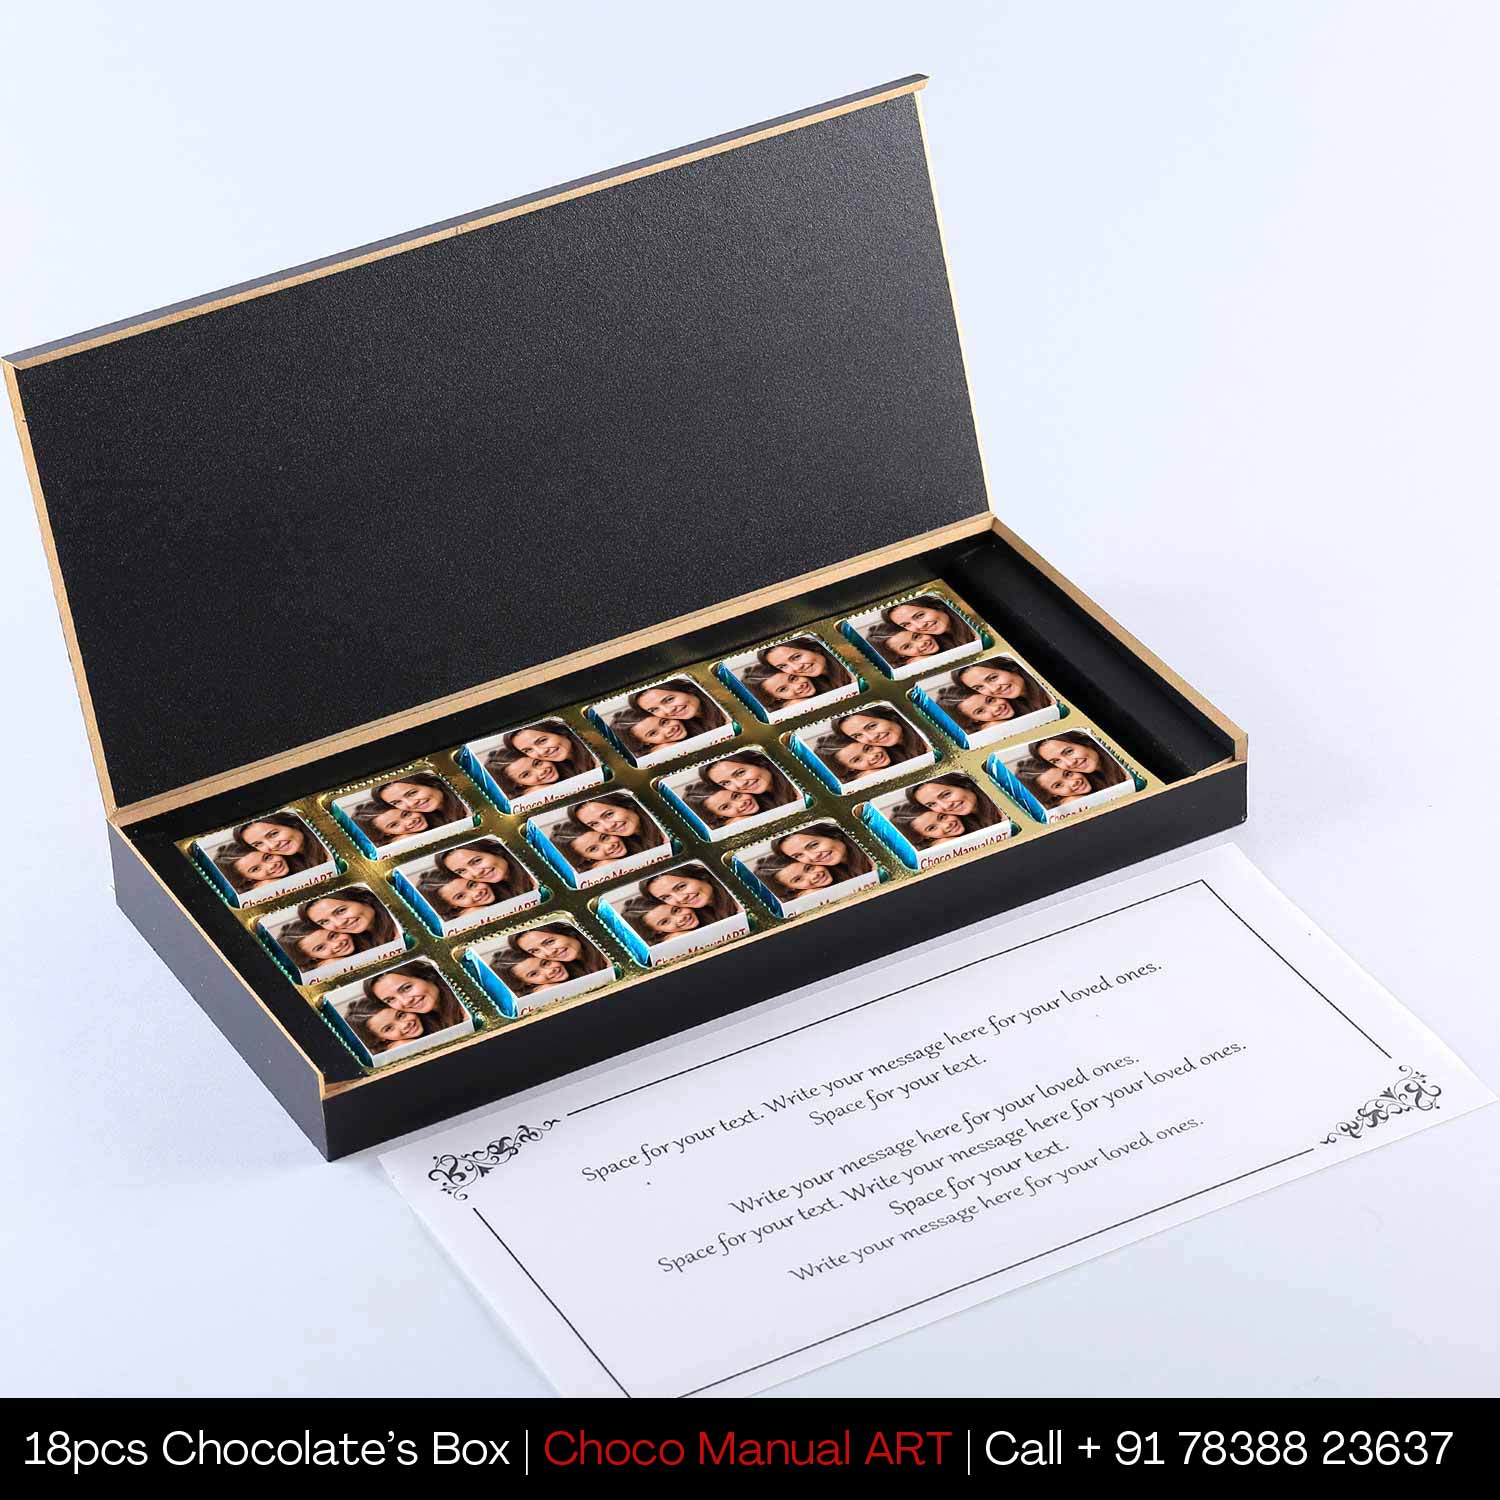 Personalized printed box of Wrapper printed chocolates